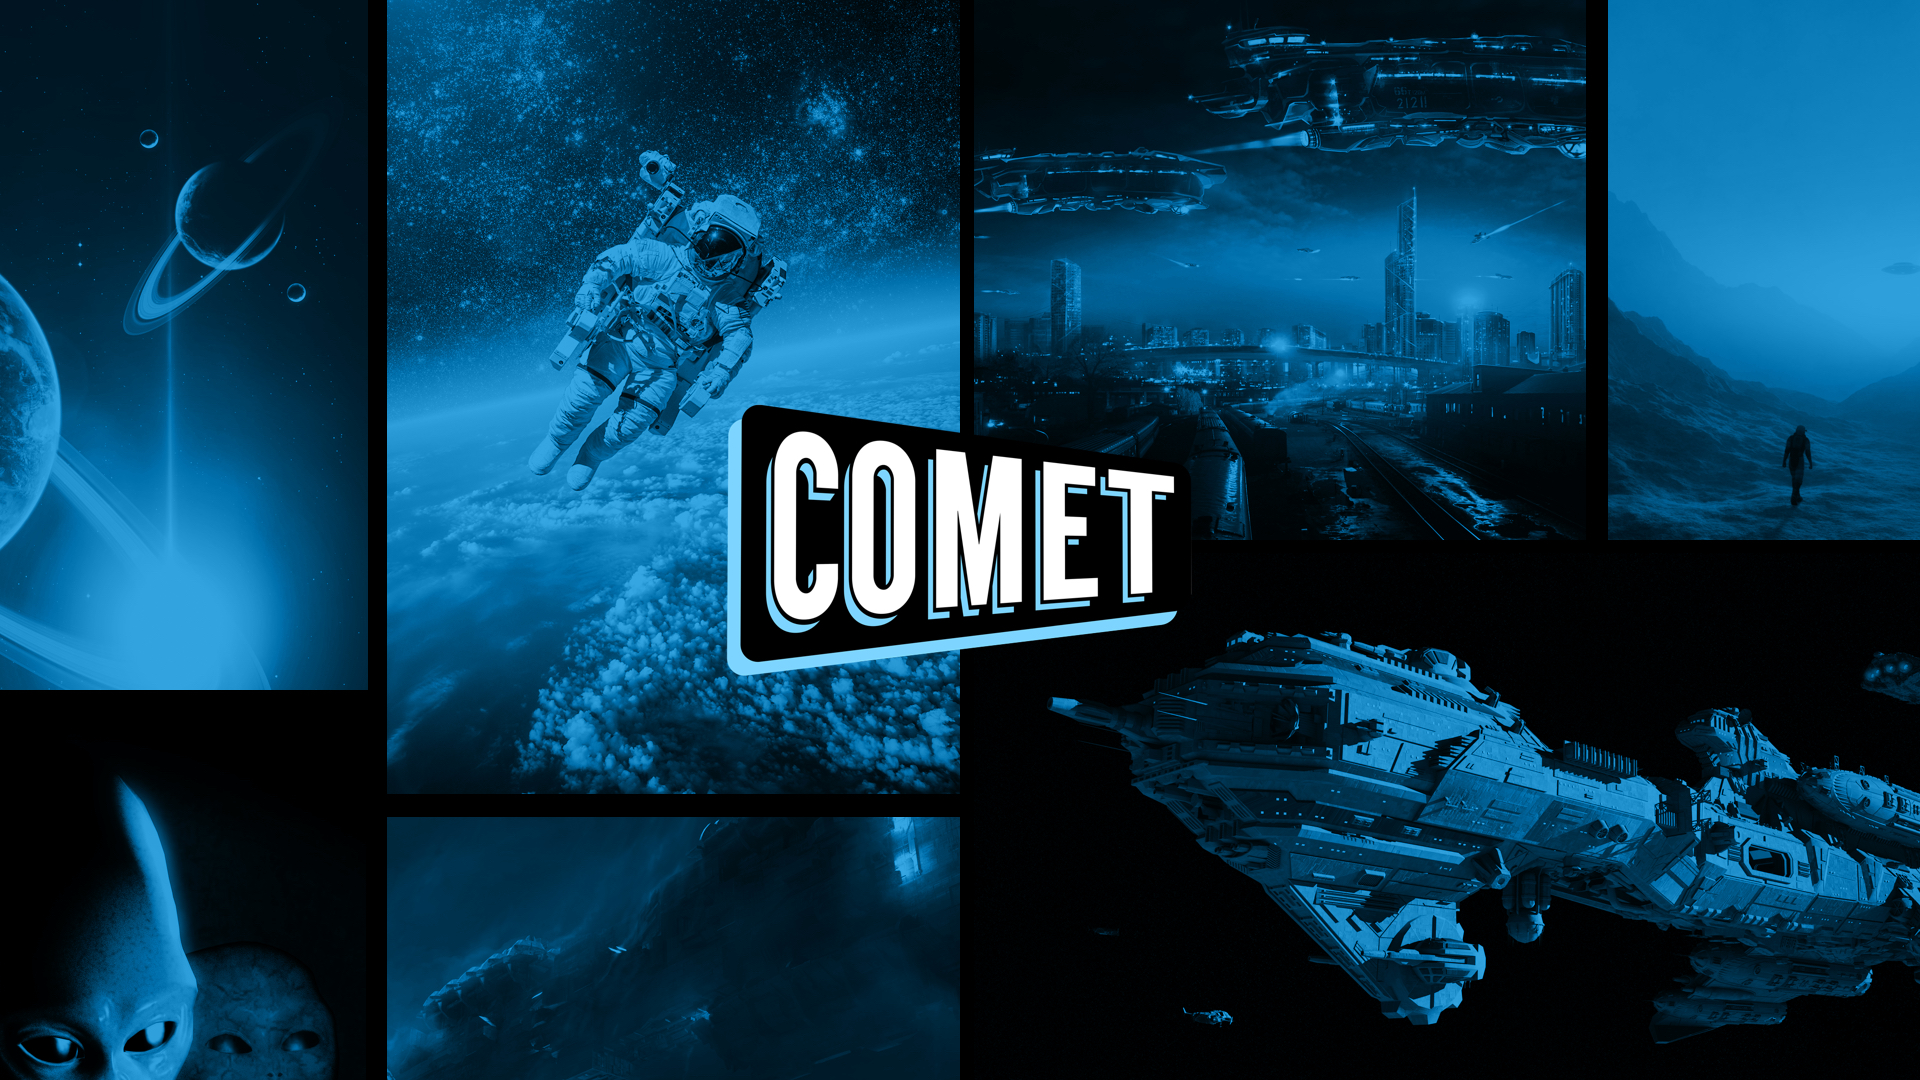 Here’s the Free Streaming Service Comet’s New Weekday Schedule for December